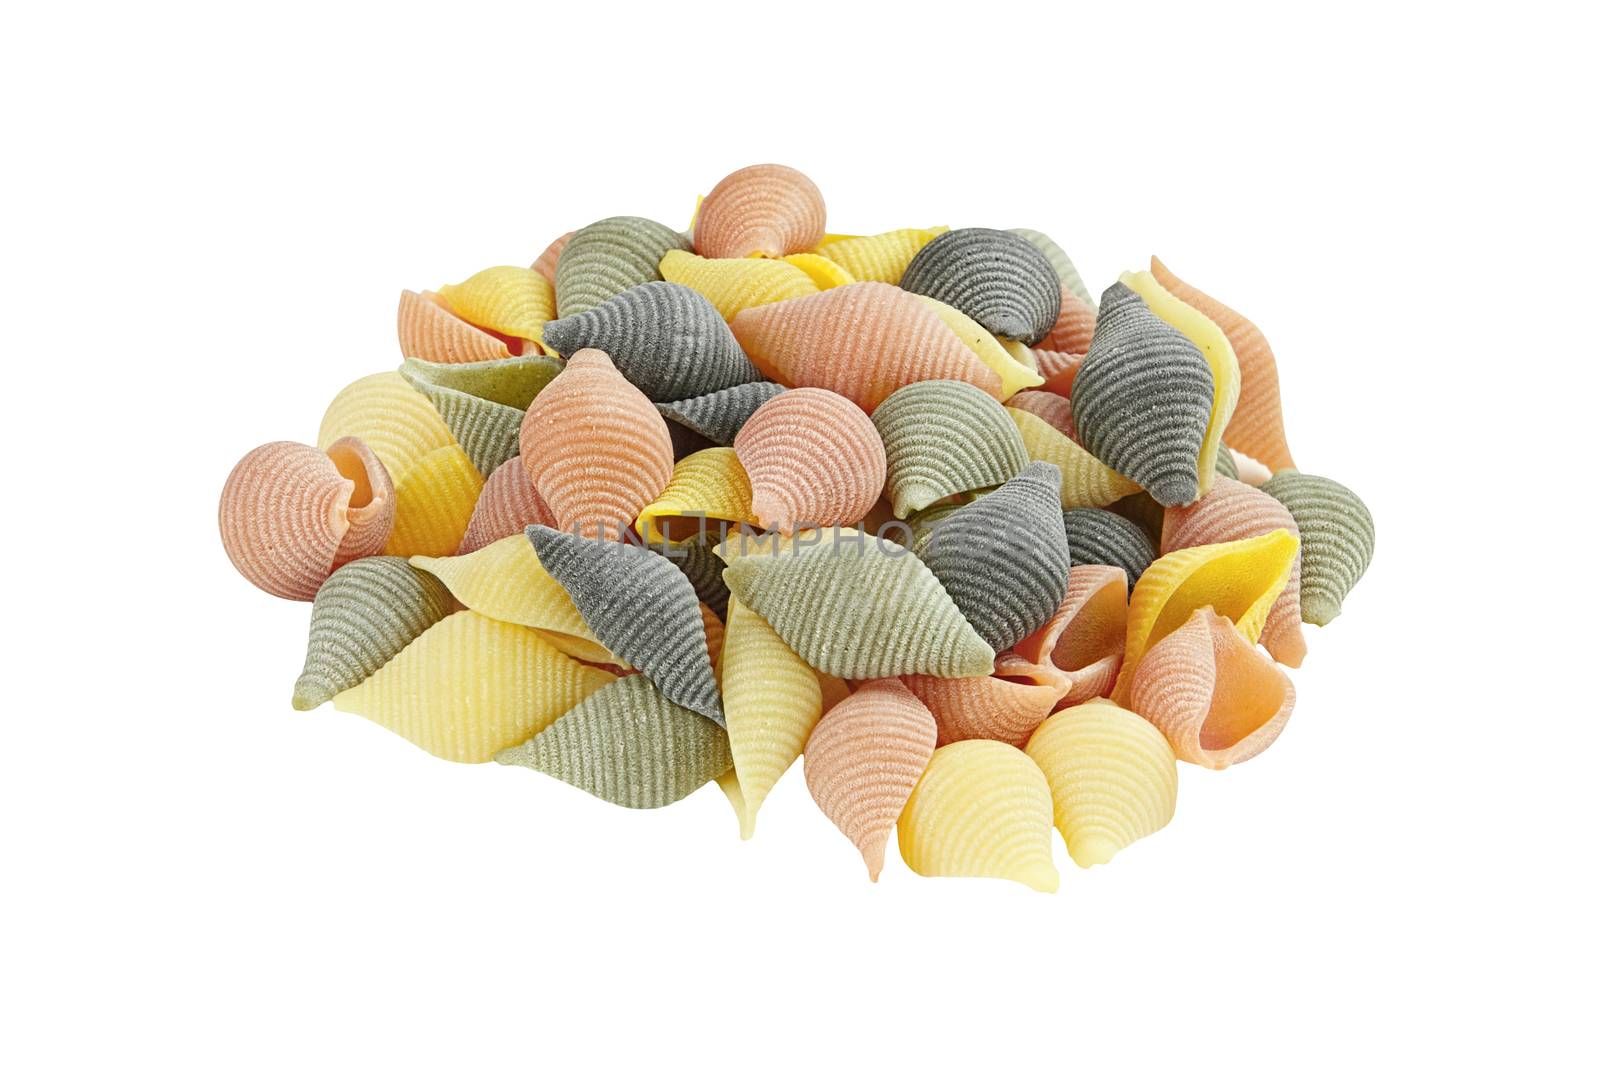 Raw colorful pasta, isolated on white background with clipping path included.